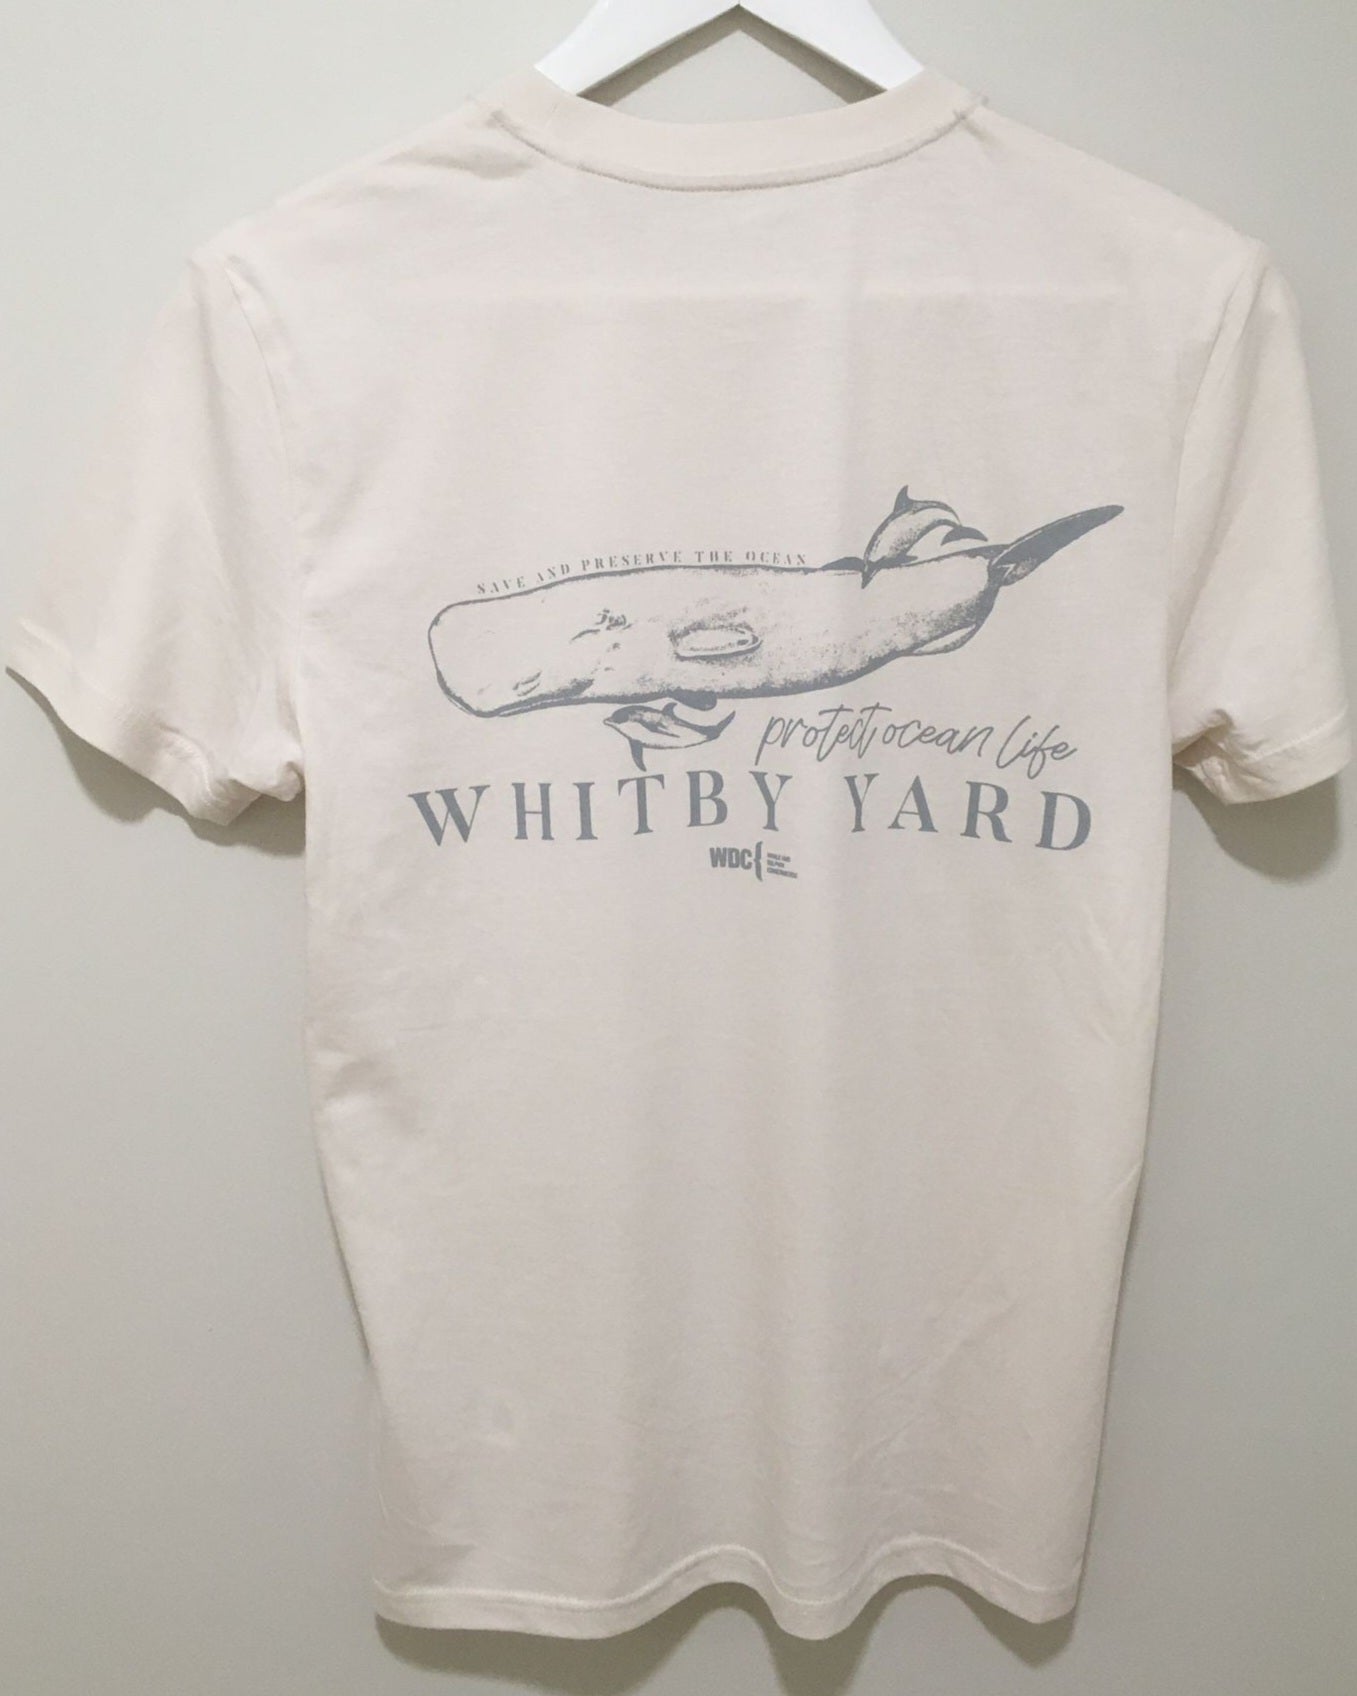 Unisex 'Whale & Dolphin Conservation’ T shirt in Cream